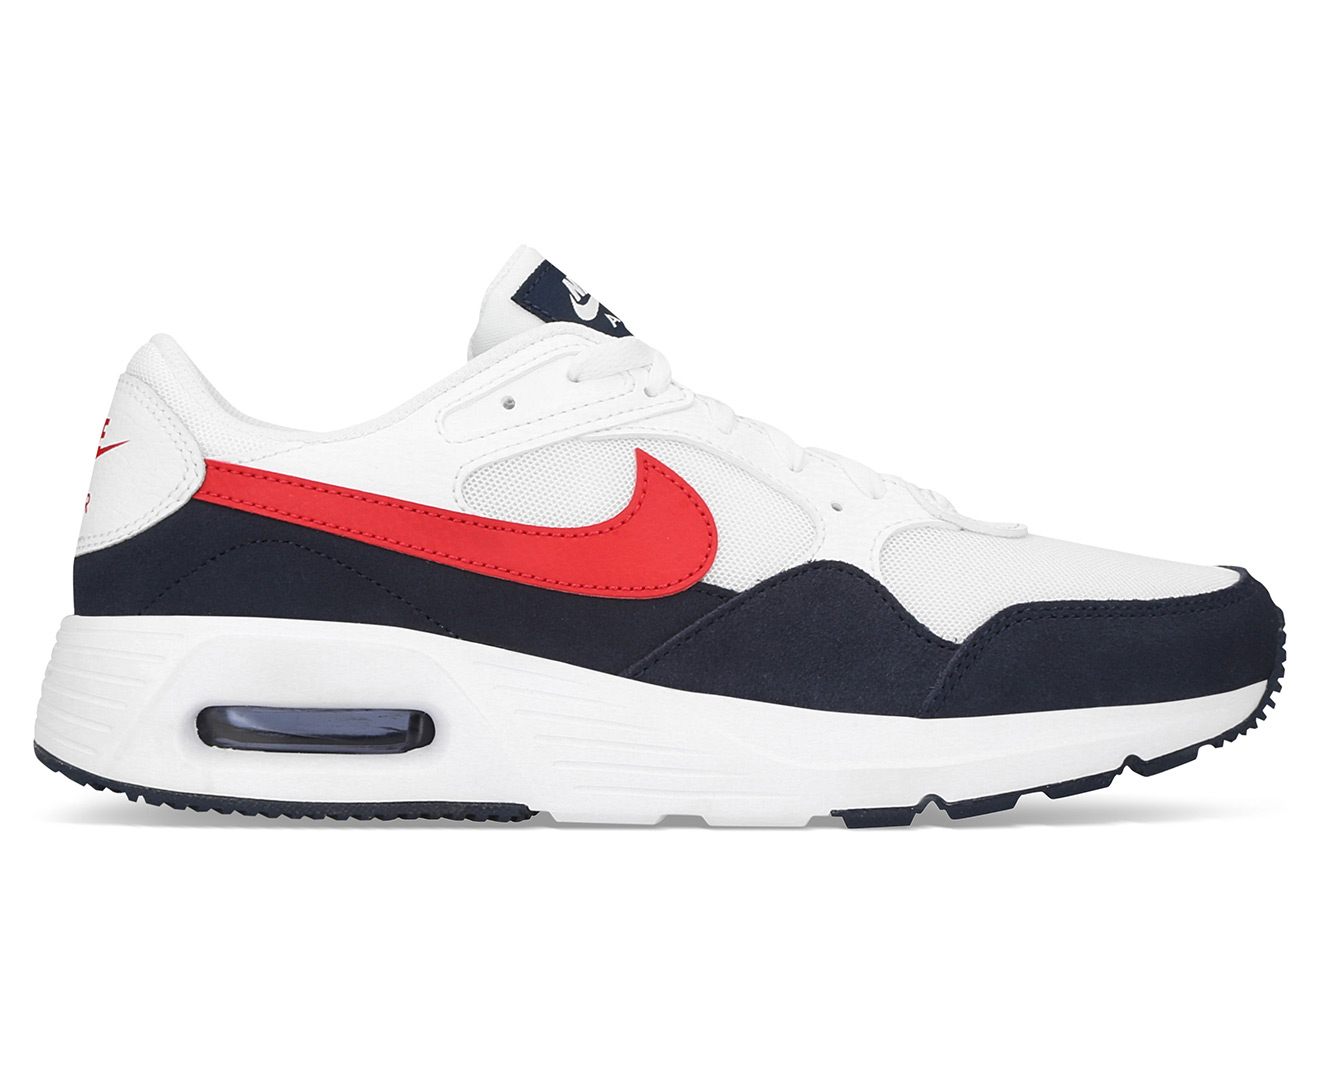 Nike Men's Air Max SC Sneakers - White/University Red/Obsidian | Catch ...